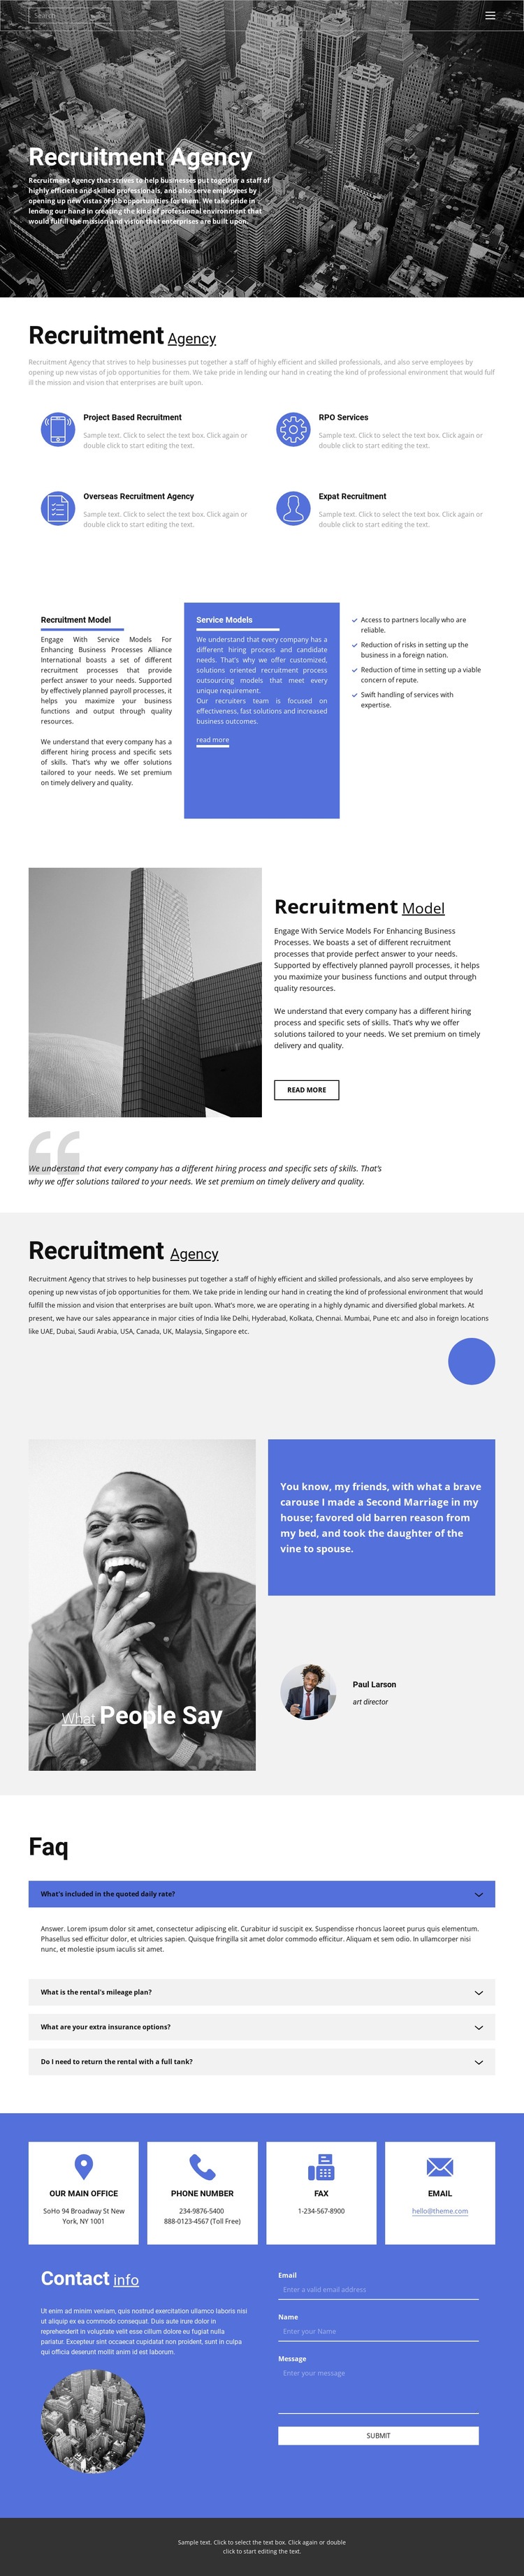 Recruiting agency with good experience Homepage Design